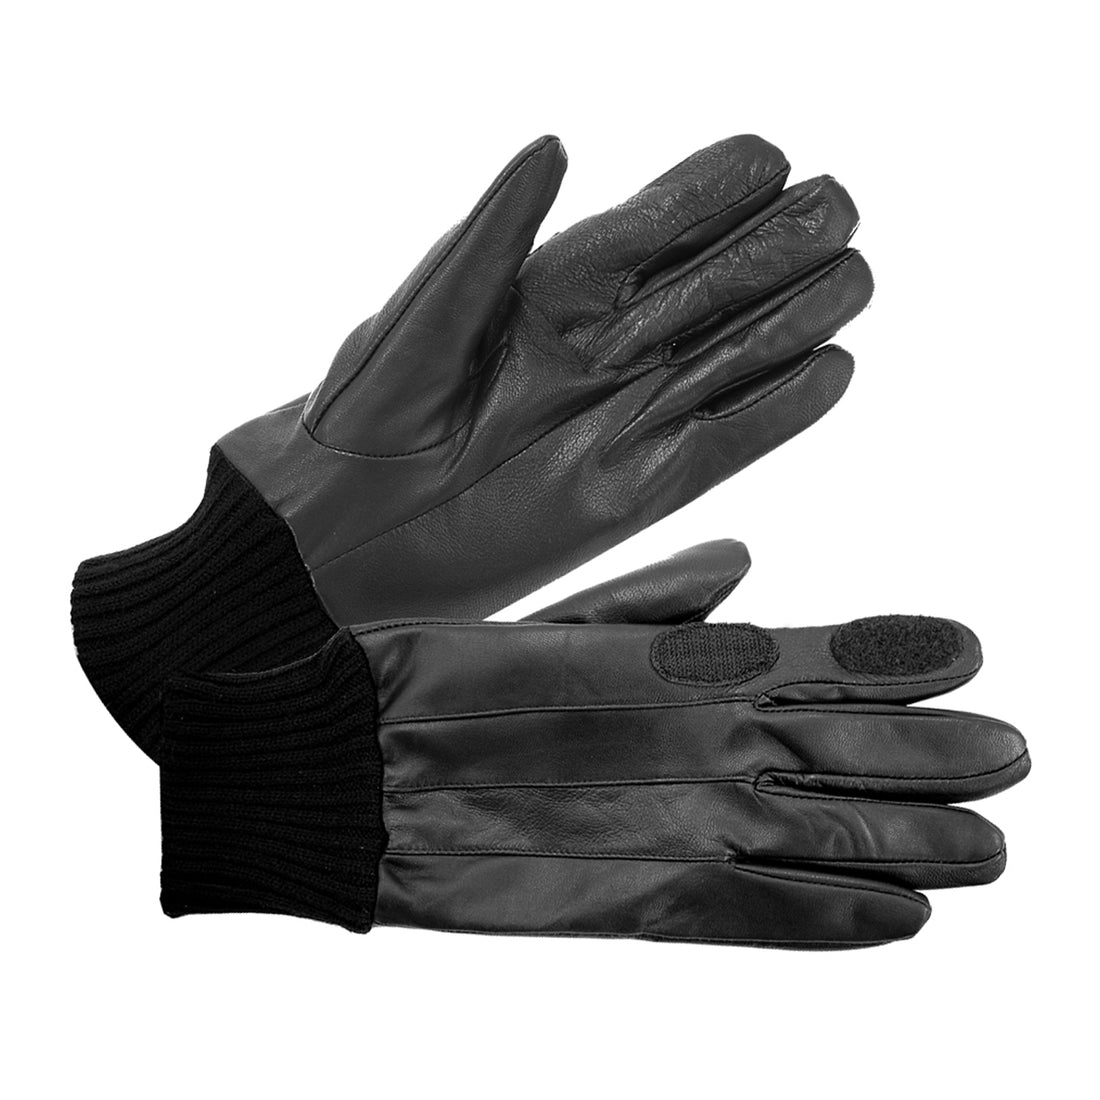 British Bag Co. Leather Shooting Gloves